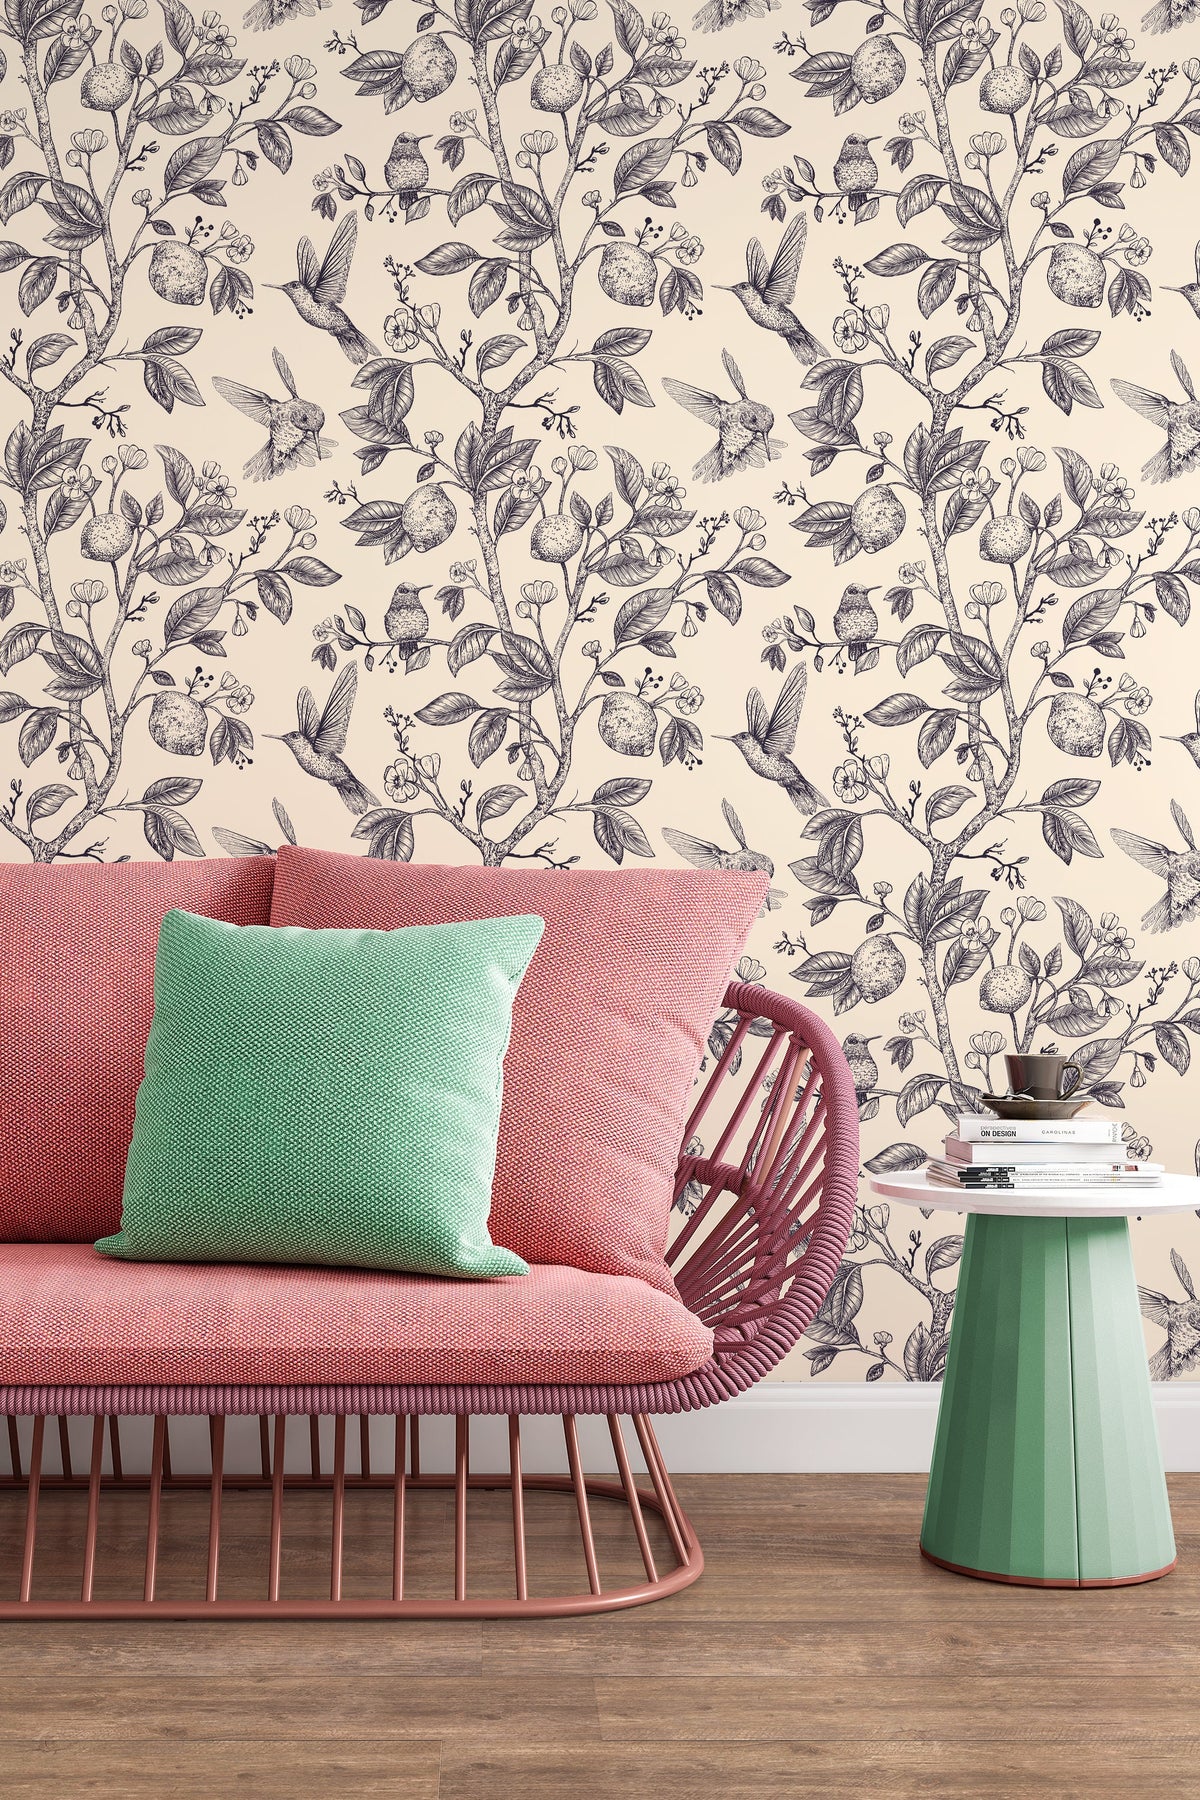 The Pioneer Woman Wallpaper at Walmart  How to Buy Ree Drummonds New  Wallpaper